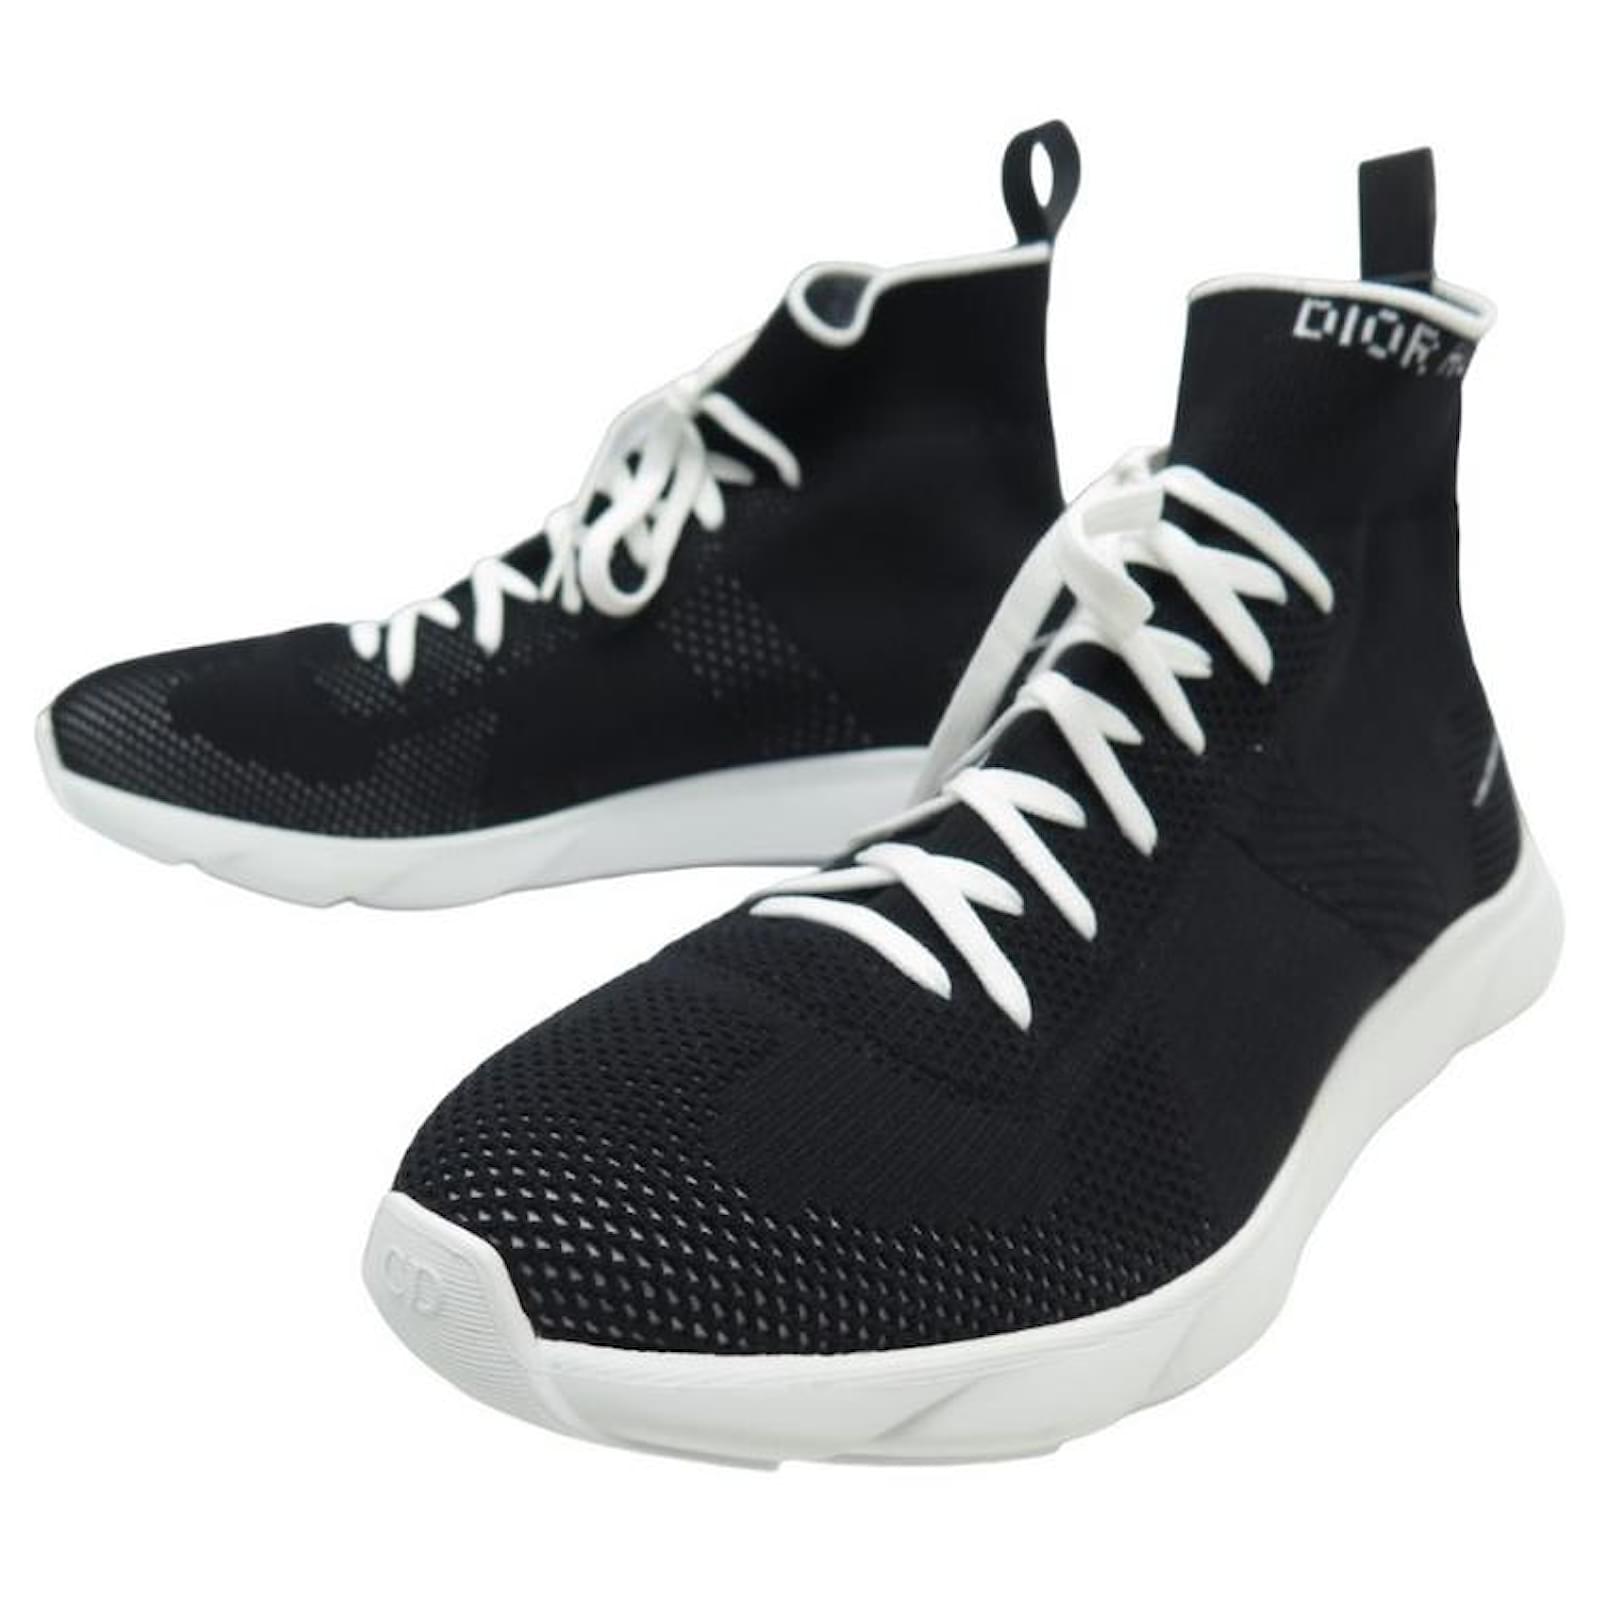 Christian Dior NEW DIOR HOMME SNEAKERS SNEAKERS B21 43 NEW SHOES BLACK ...